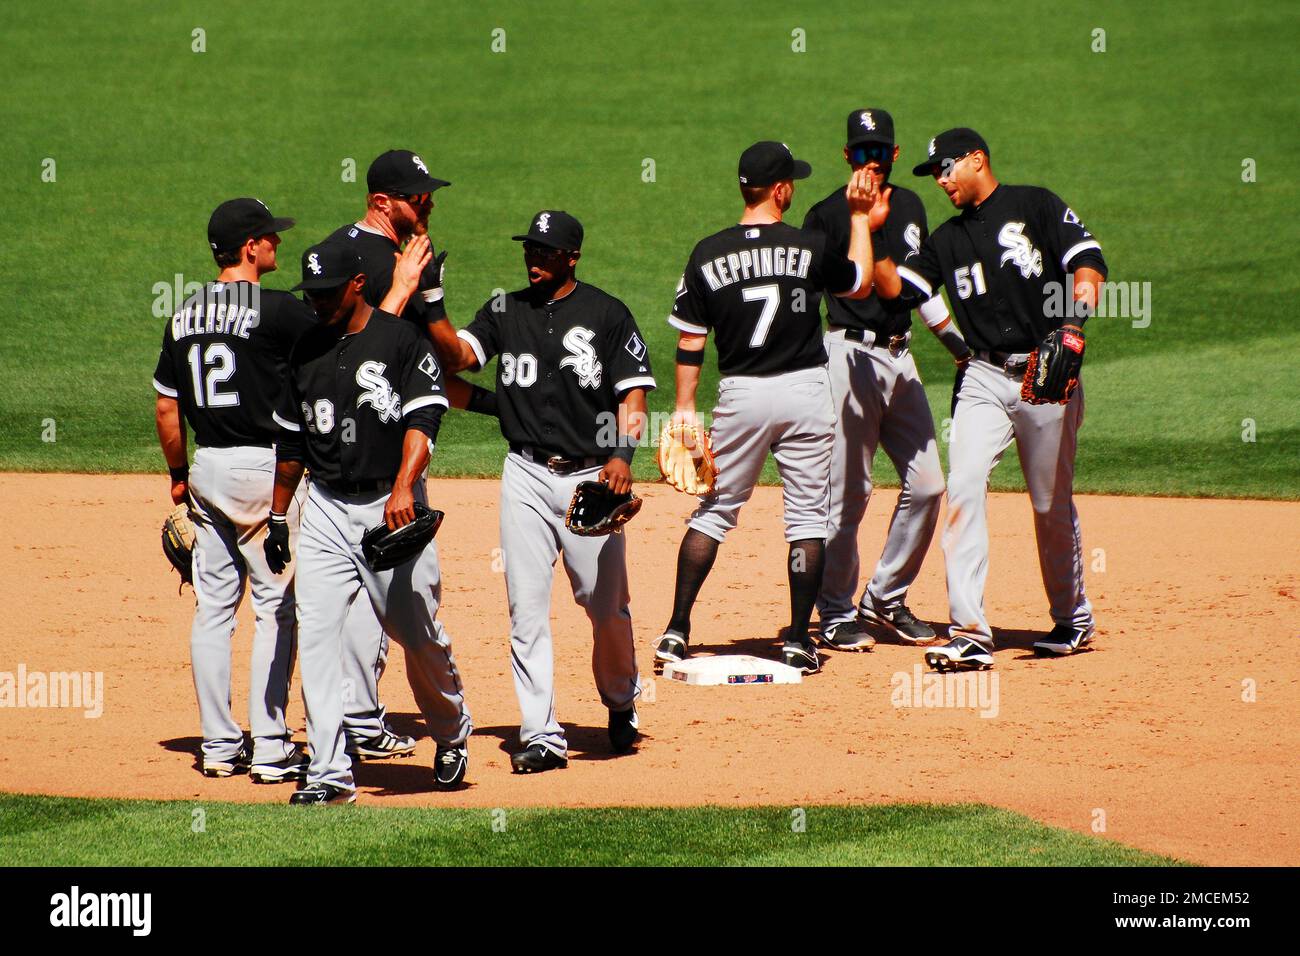 The Chicago White Sox baseball team congratulates each other with high fives after a game victory Stock Photo